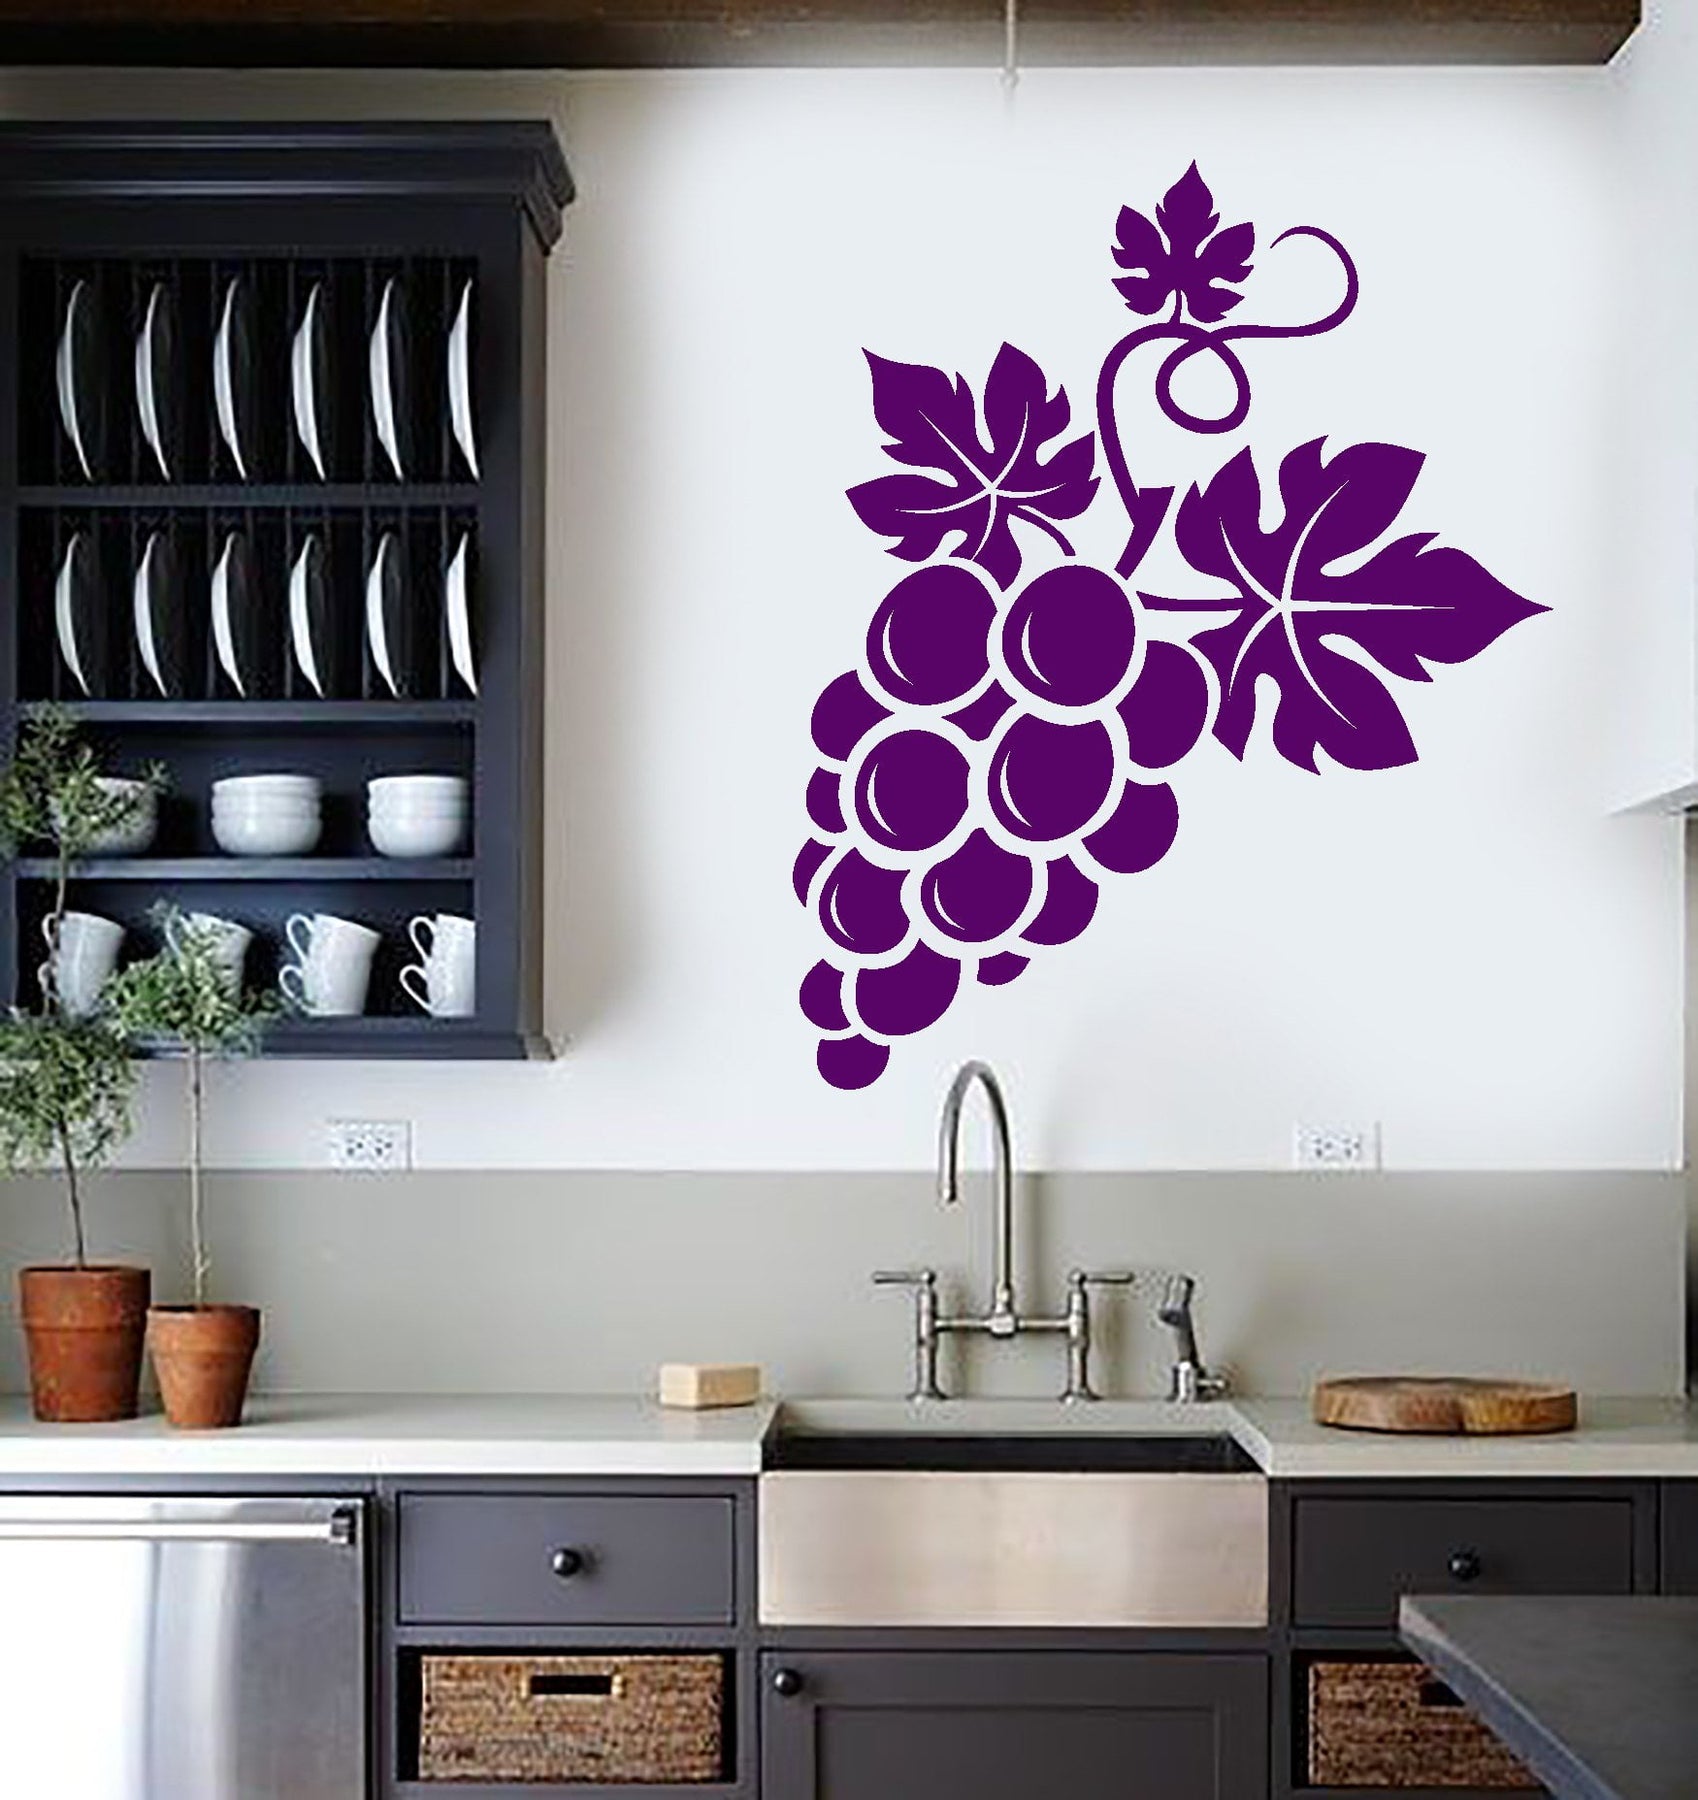 Vinyl Wall Decal Bunch Of Grapes Fruit Wine Kitchen Decor Stickers